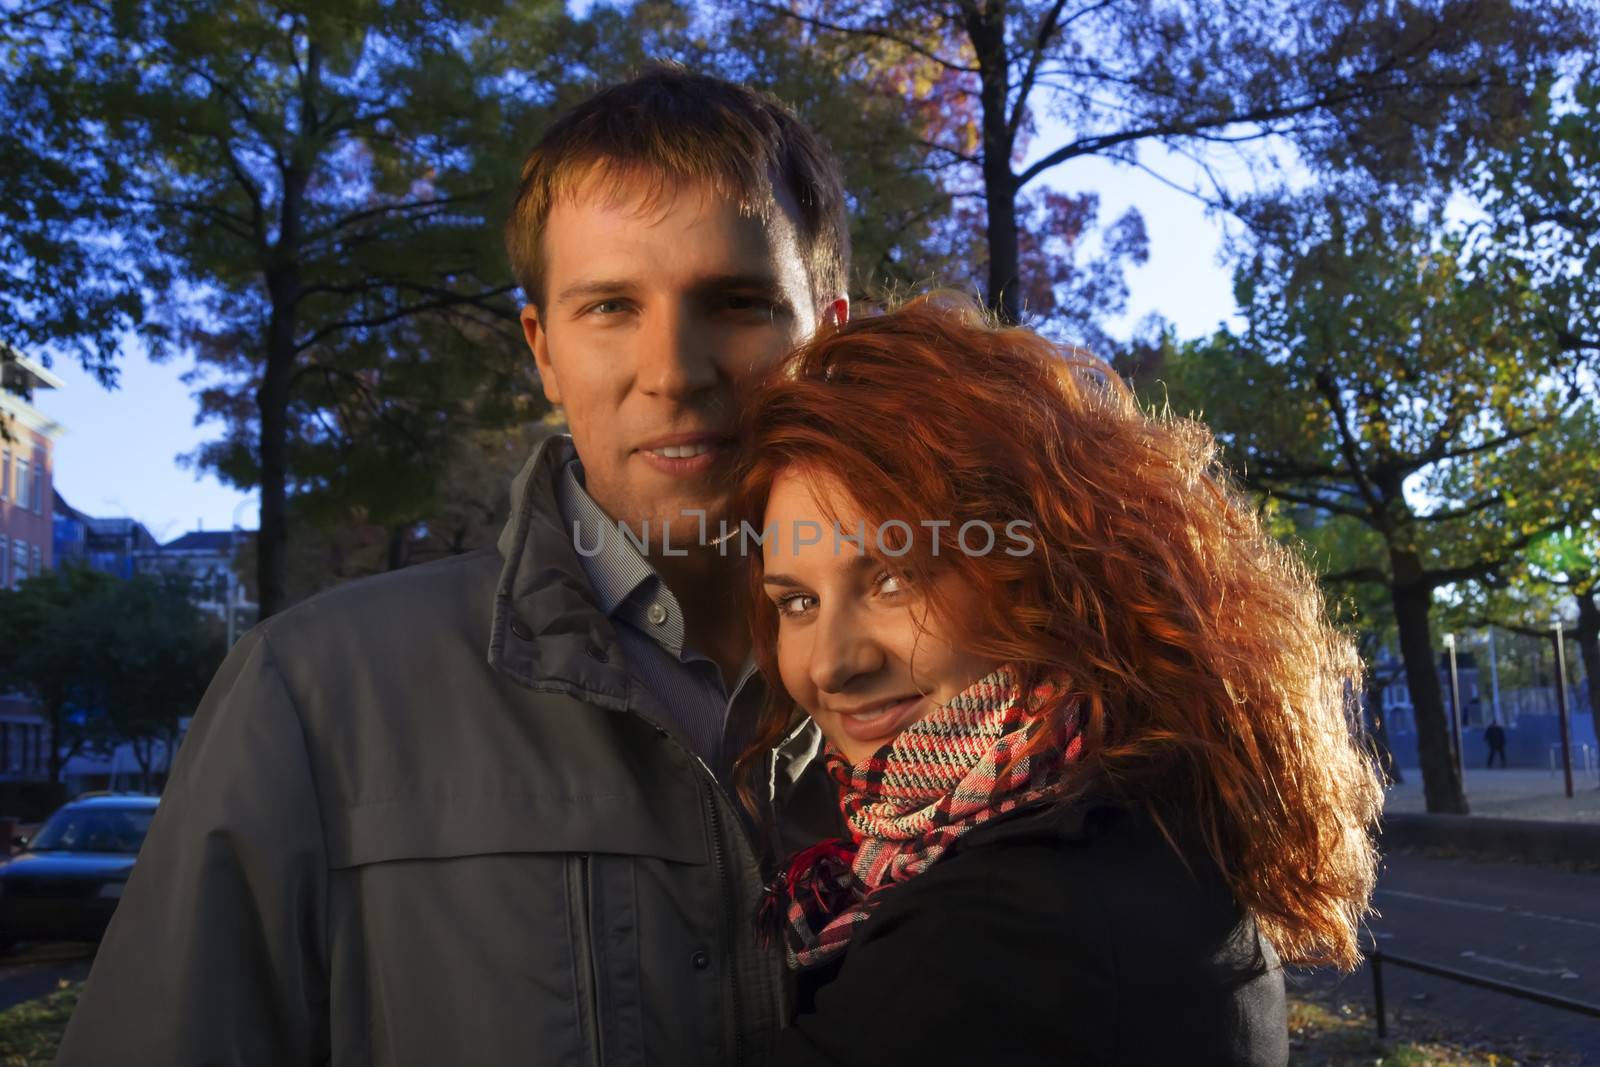 Outdoor happy couple in love, Museum Plein, autumn Amsterdam bac by Tetyana